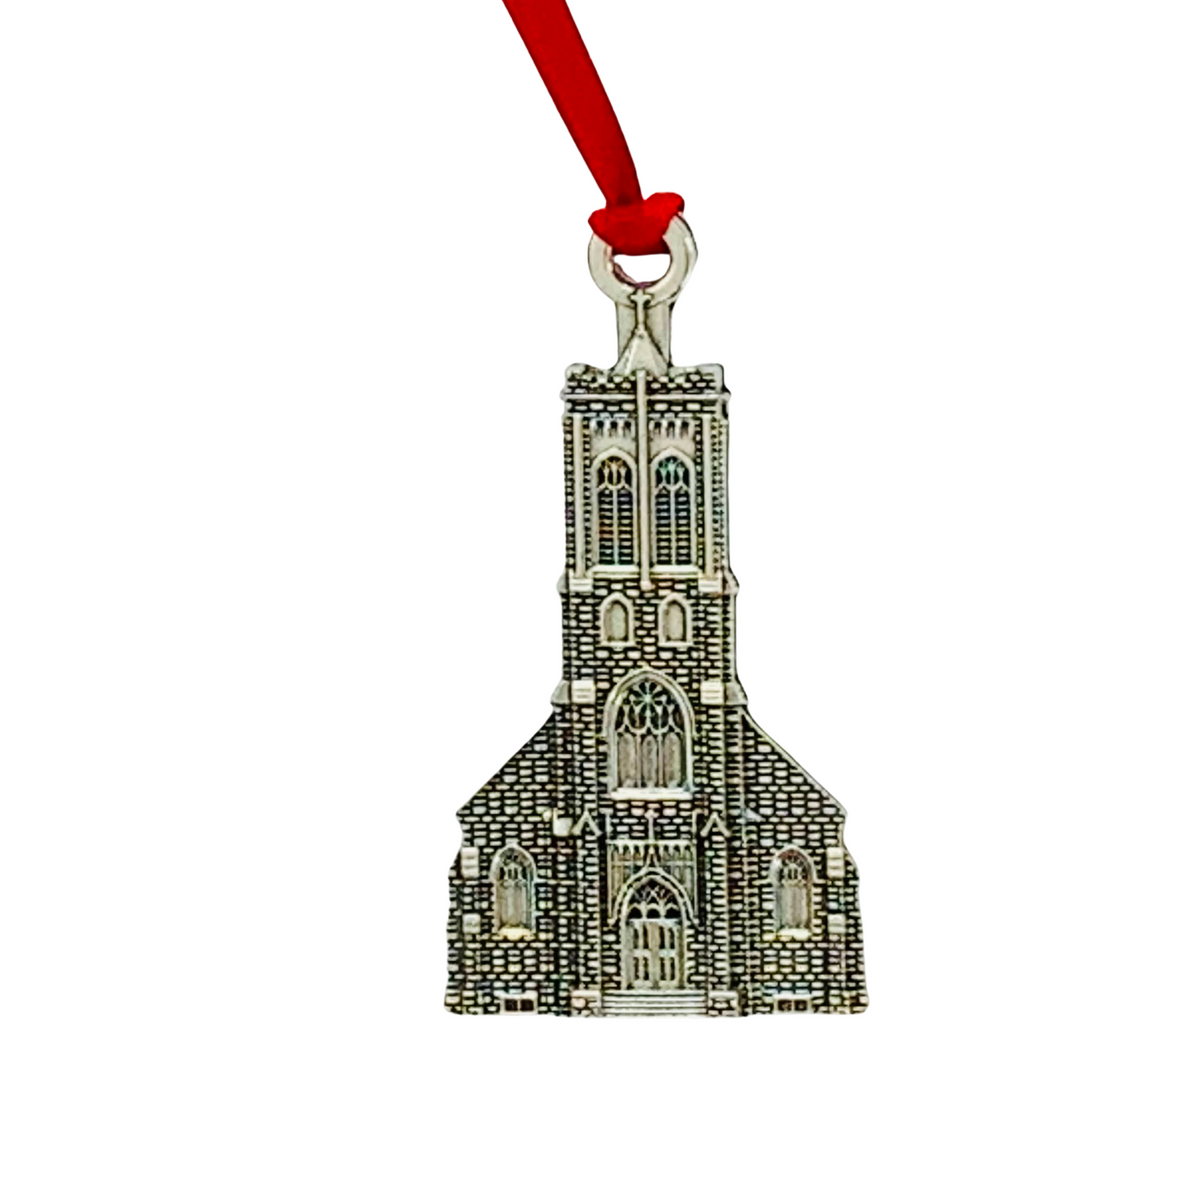 2018 Pewter - Sacred Heart of Mary (Wolfe Island)